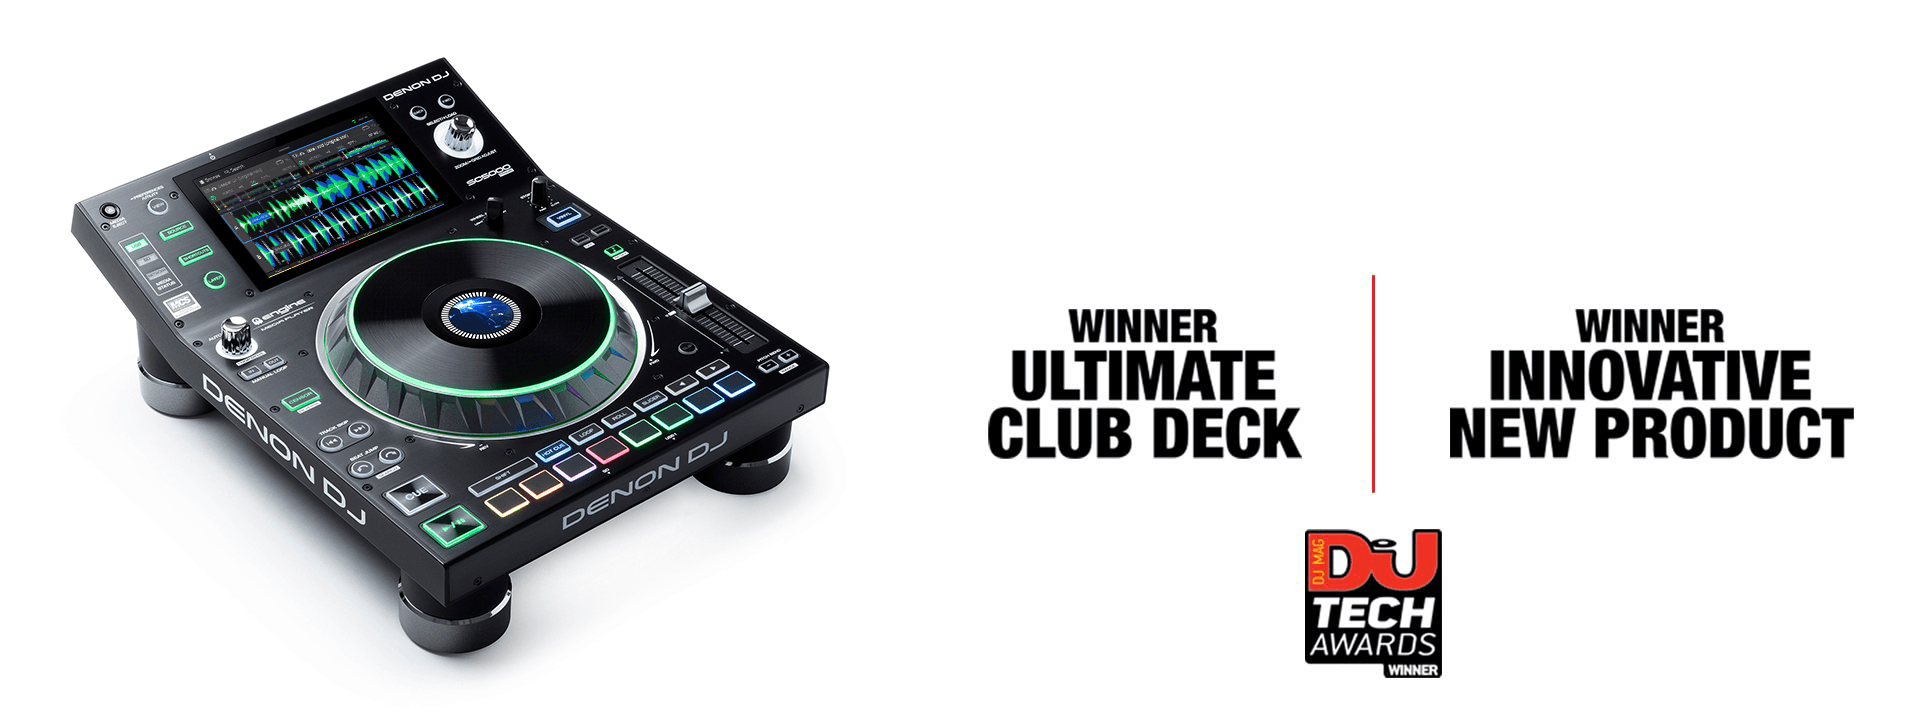 SC5000 PRIME - winner of 'Ultimate Club Deck' and 'Innovative New Product' in the DJ Mag Tech Awards